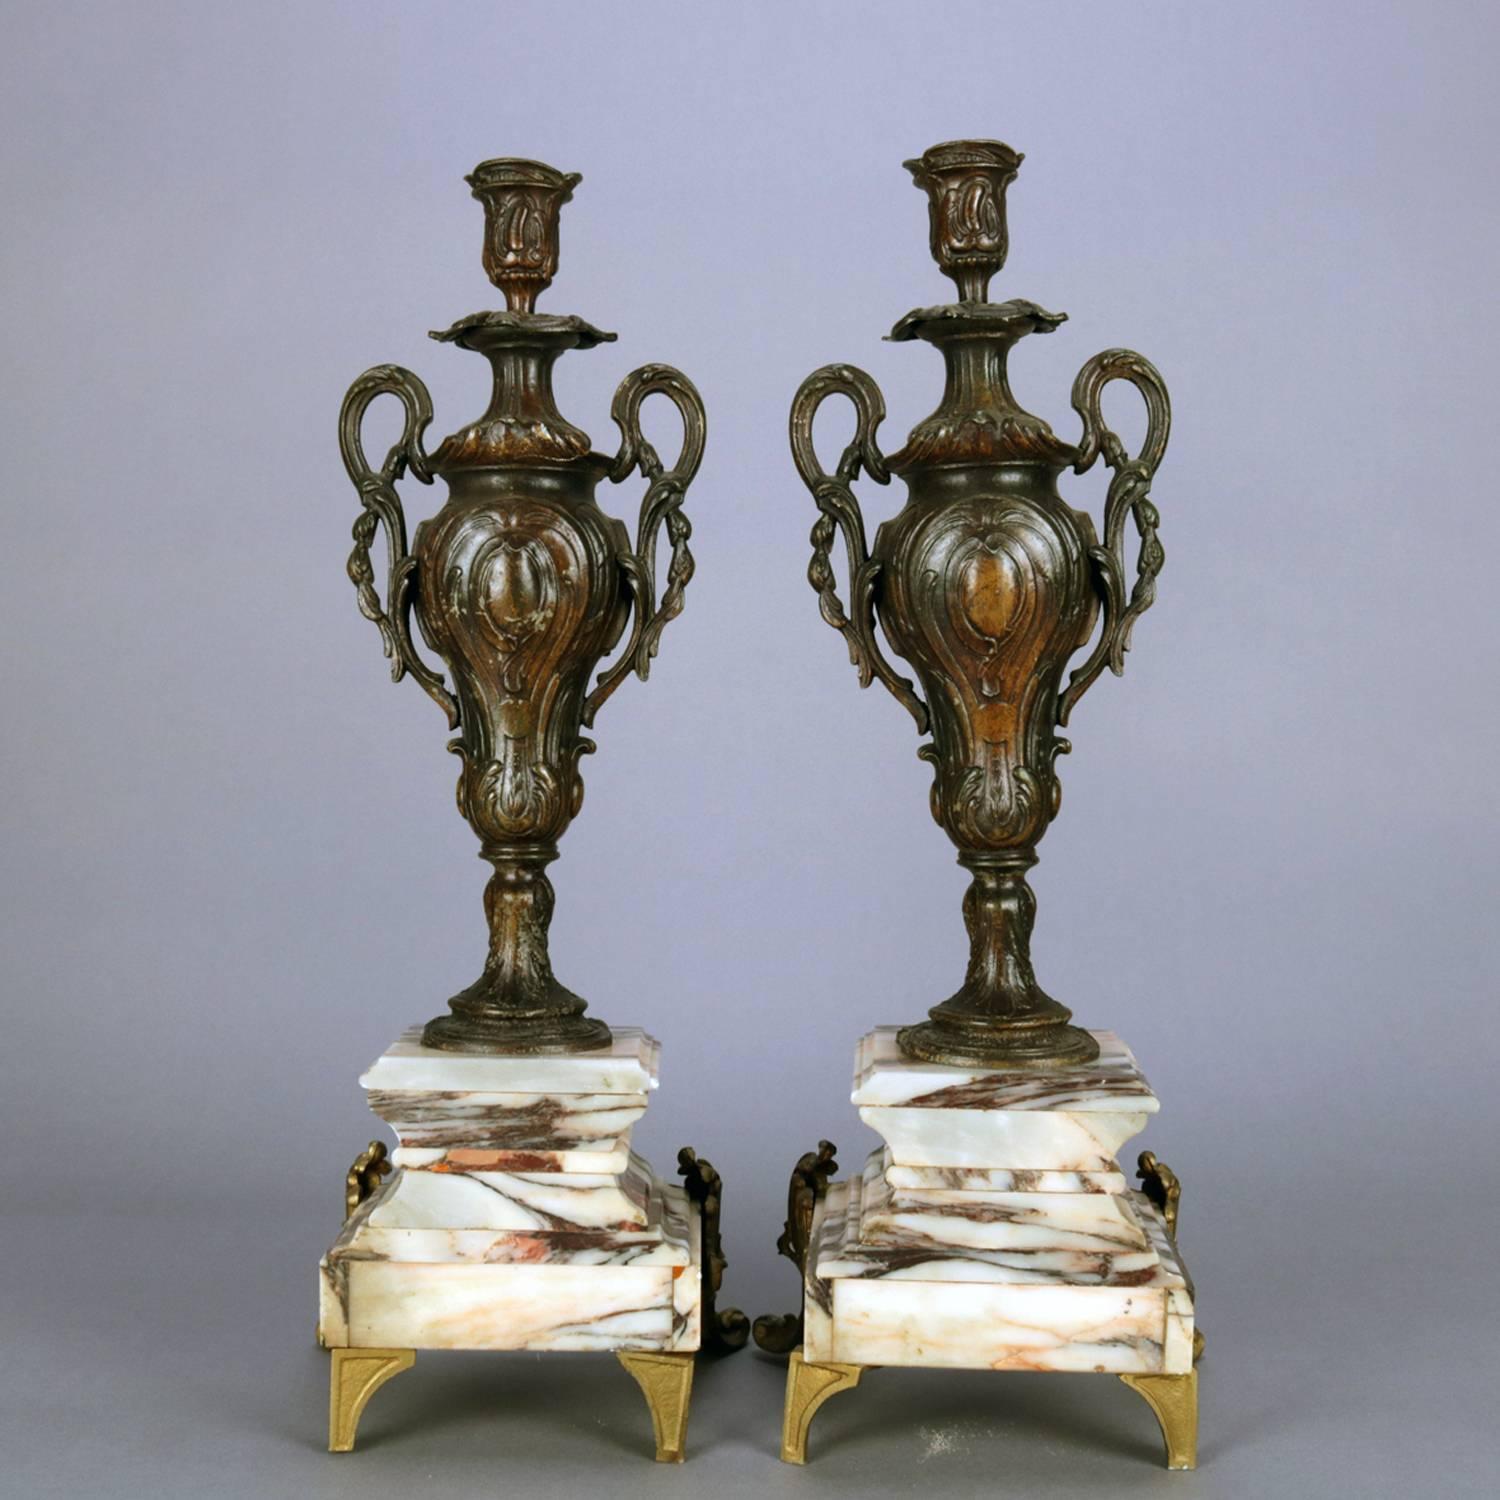 19th Century Pair of Classical Parcel-Gilt and Bronzed Urn Form Candlesticks on Marble Base